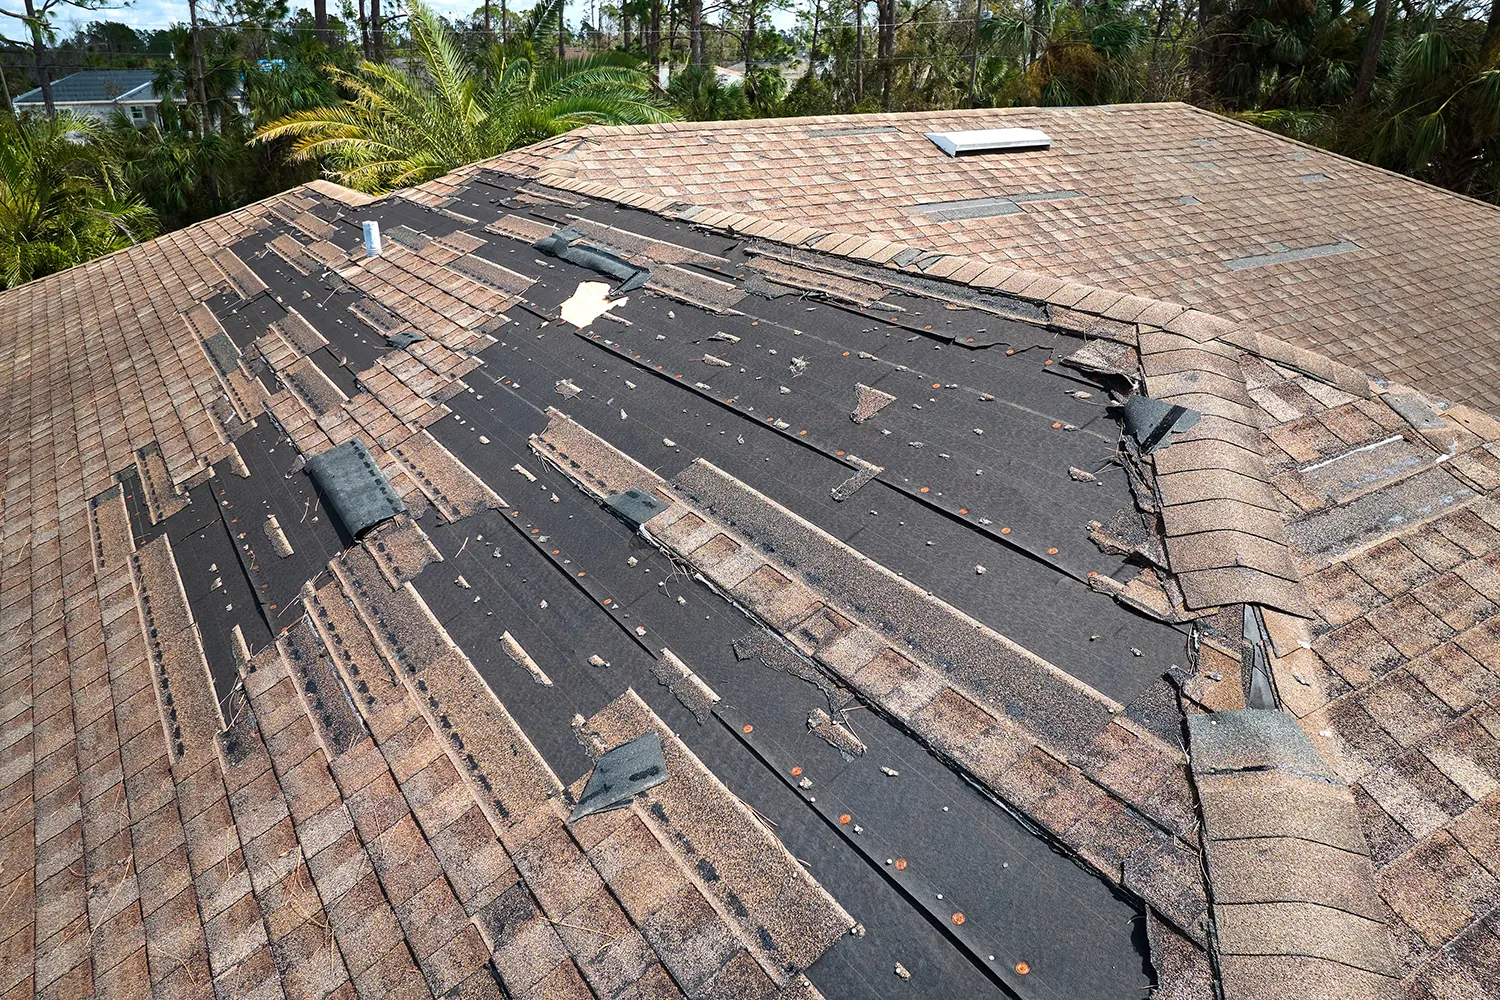 roofs with damage after a storm